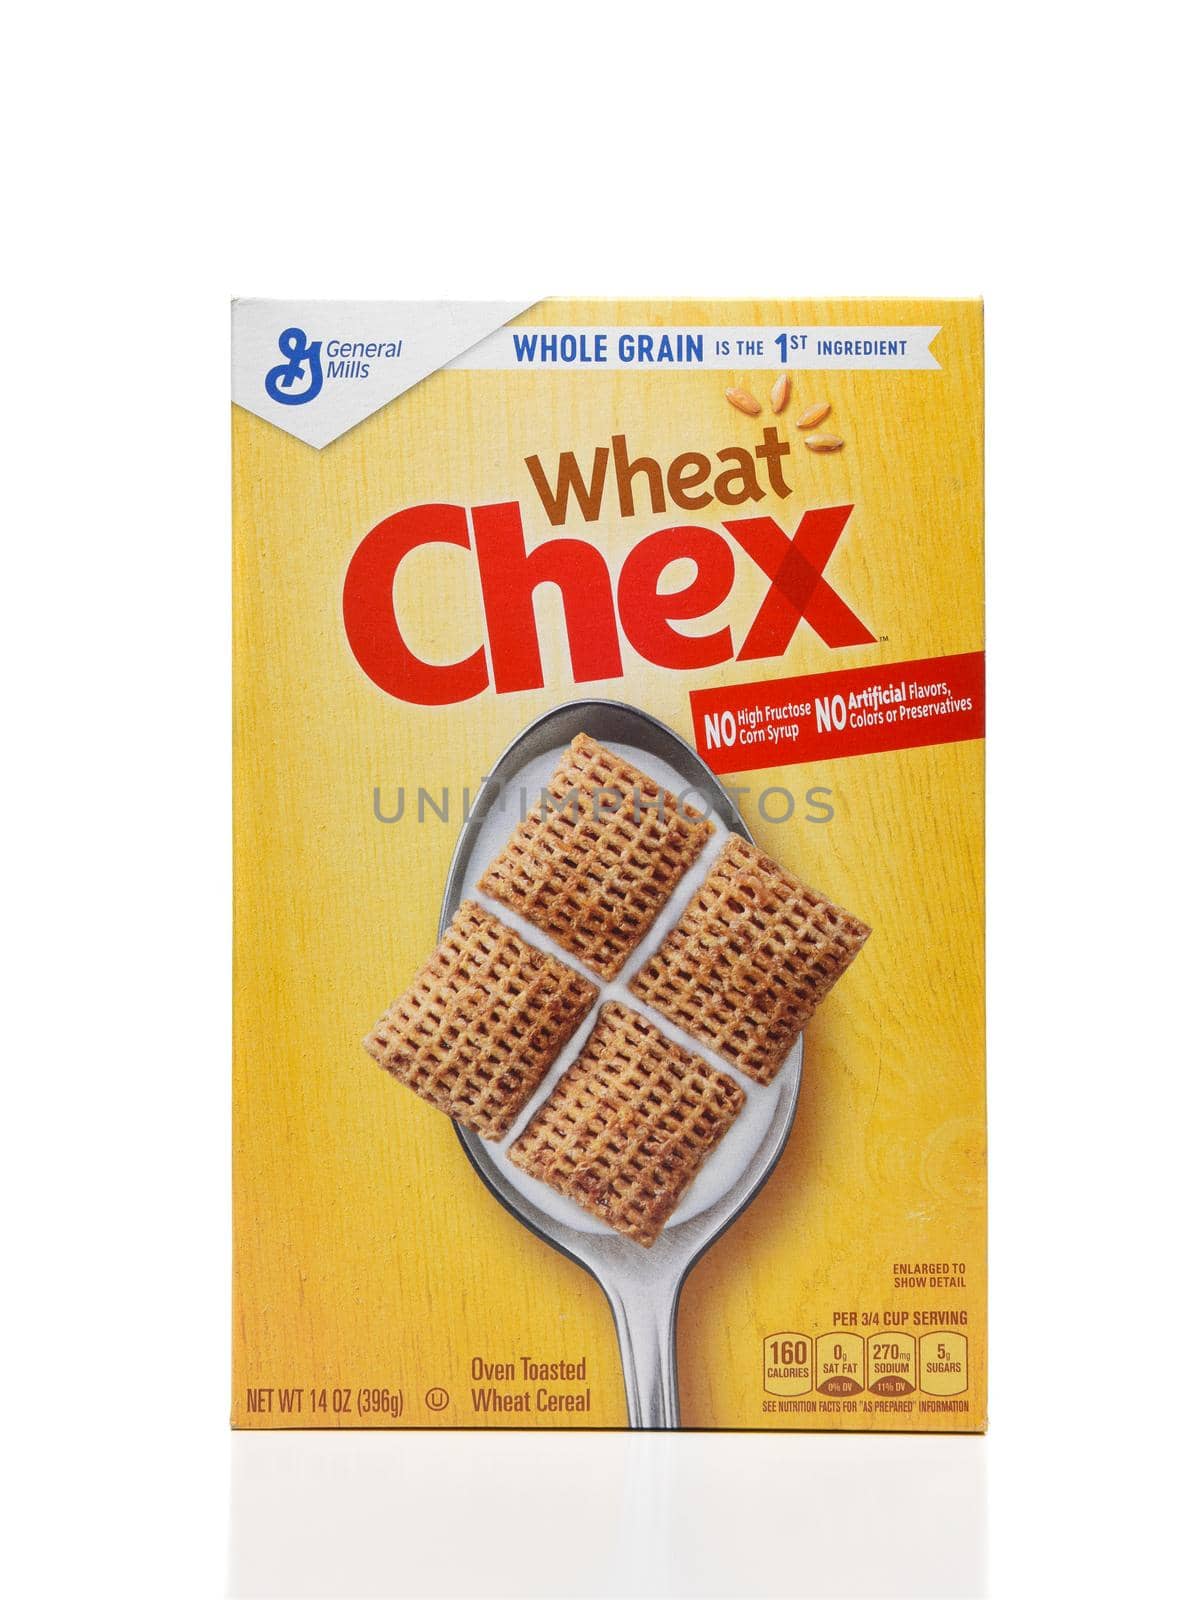 IRVINE, CALIFORNIA - AUGUST 30, 2019: A box of Wheat Chex breakfast cereal form General Mills.